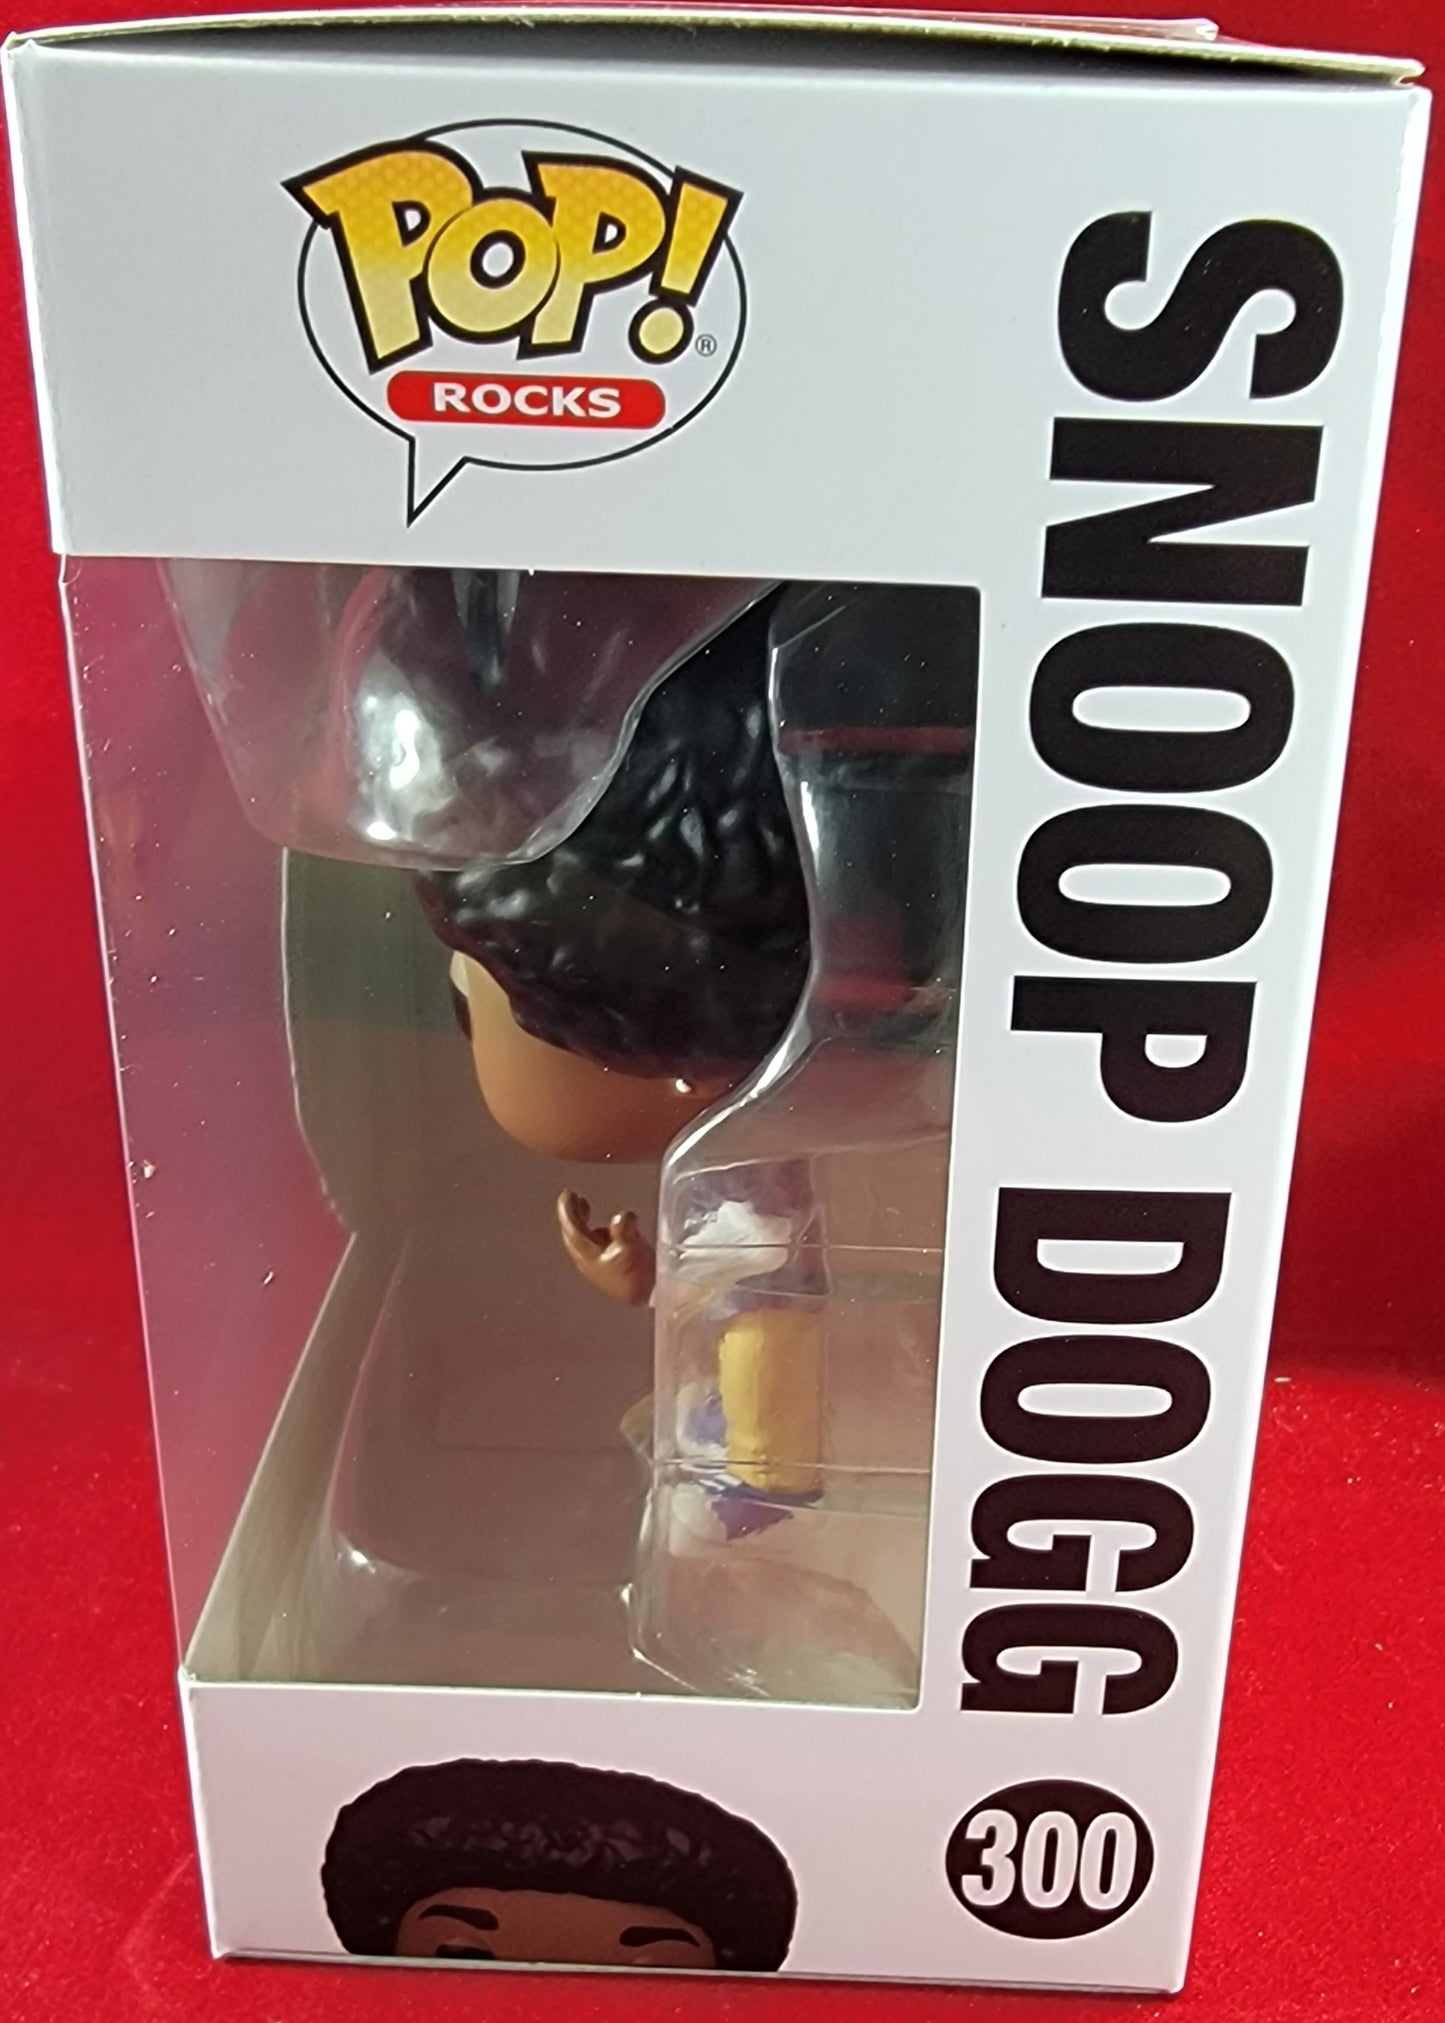 Snoop Dogg funko # 300 (nib)
brand new snoop rapper funko pop. snoop dog is in all afro glory in khakis with blue plad. pop is in near perfect condition and will be shipped in a compatible pop protector.